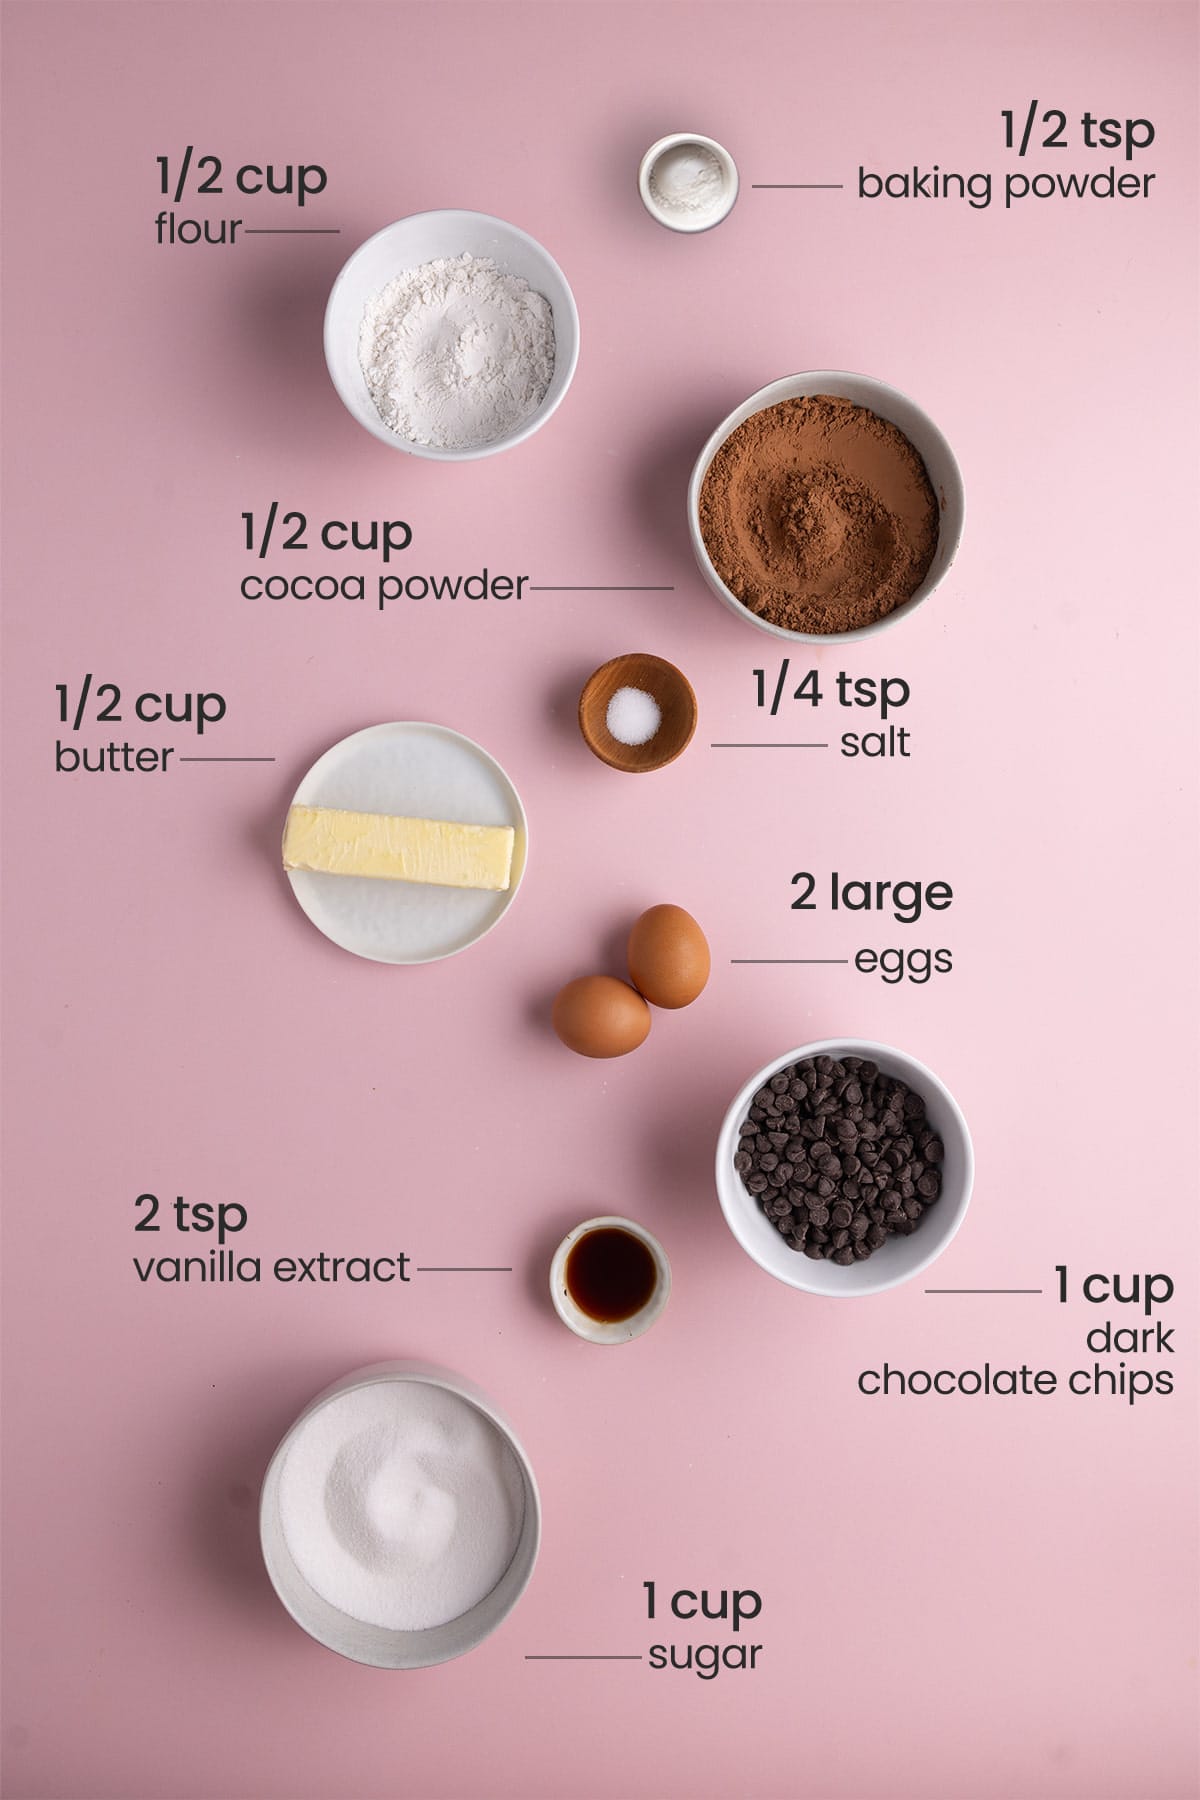 All ingredients needed for brownie bites including baking powder, sugar, butter, cocoa powder, salt, eggs, chocolate chips, vanilla extract, and flour